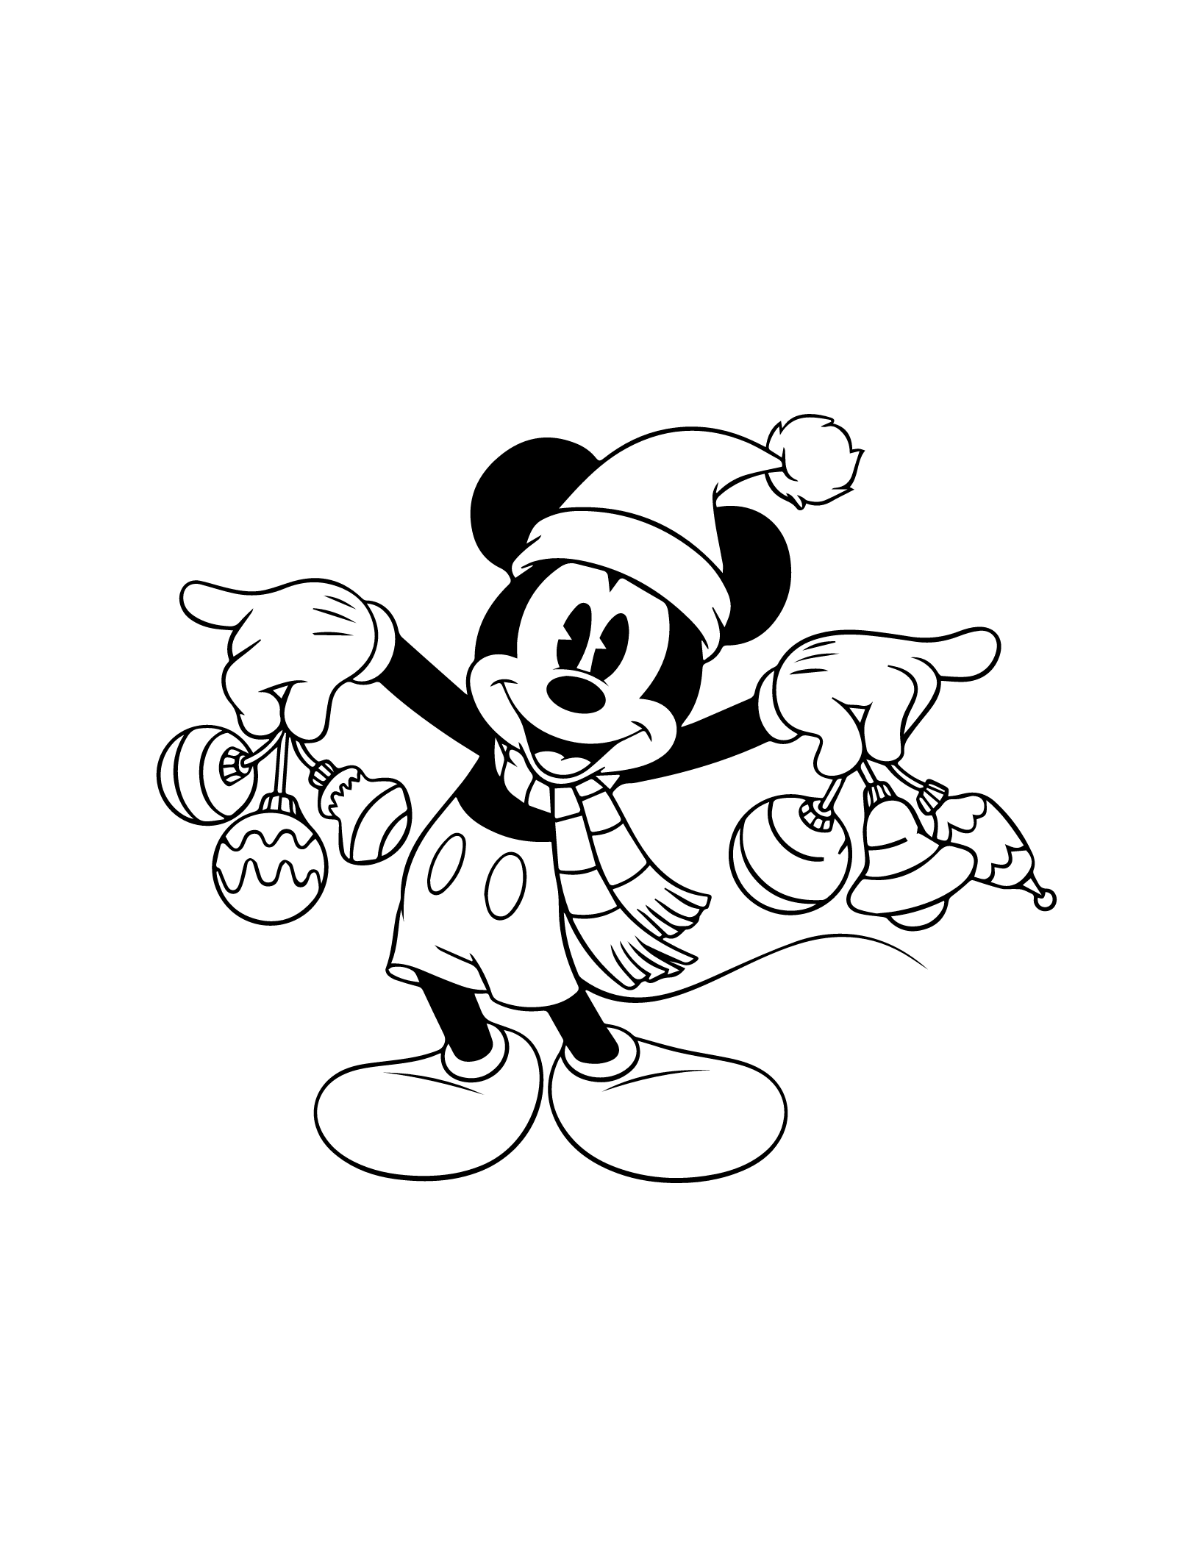 Disney Christmas Coloring Page Template